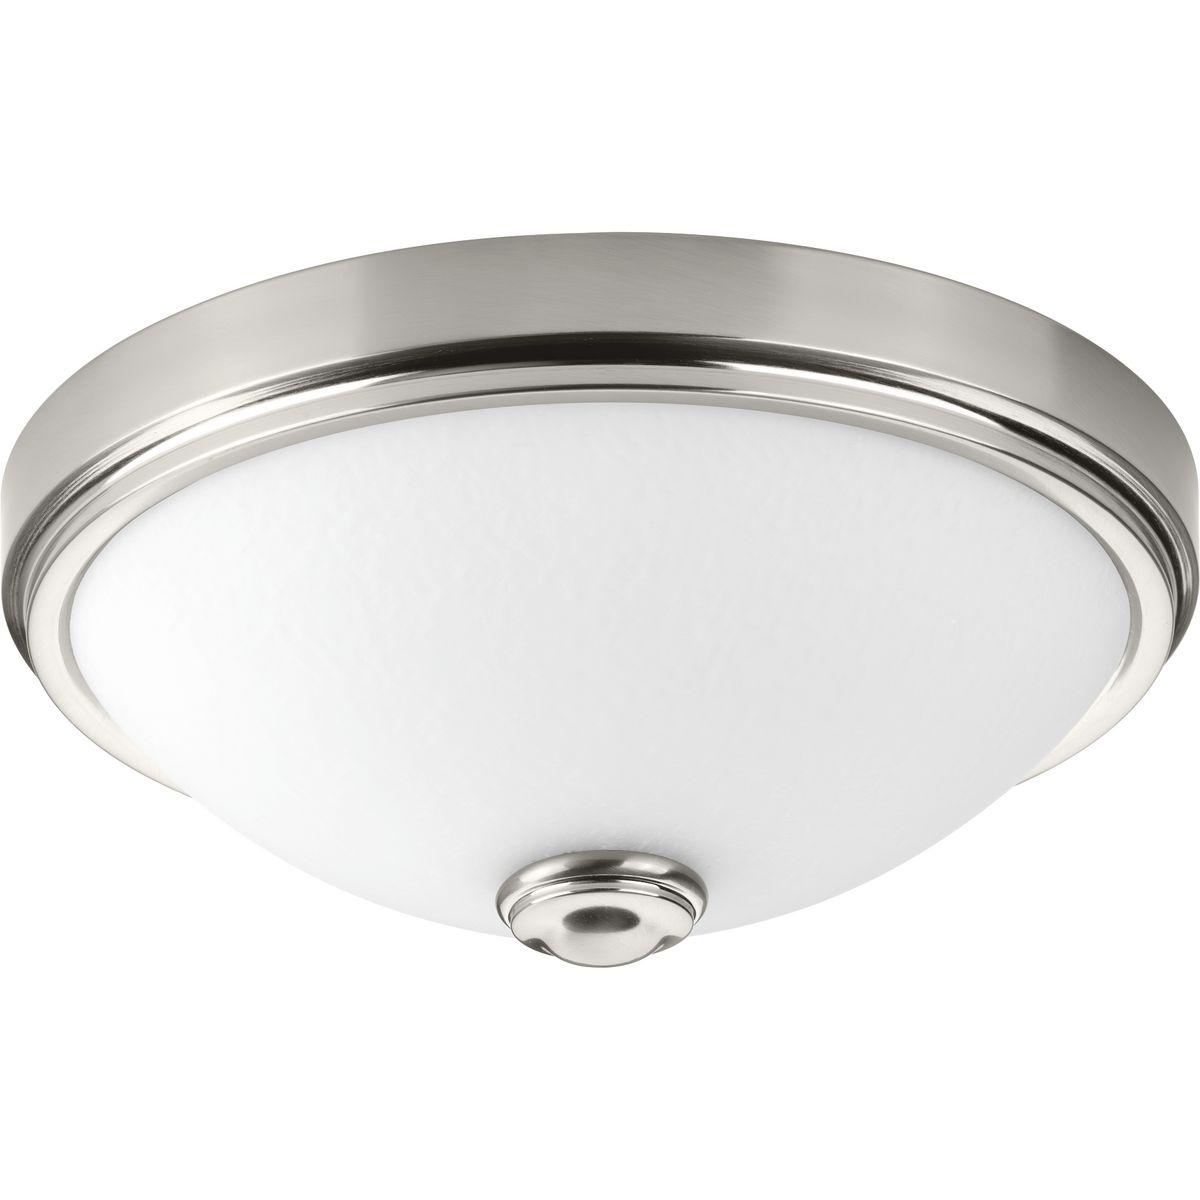 Hubbell P350007-009-30 One-light 15 inch LED Flush Mount in Brushed Nickel features a white linen glass bowl. Fixtures are dimmable to 10 percent with Triac, phase forward or ELV dimmers. 3000K and 90 CRI.  ; Brushed Nickel finish. ; Dimmable to 10% with many Triac/Forward Phas